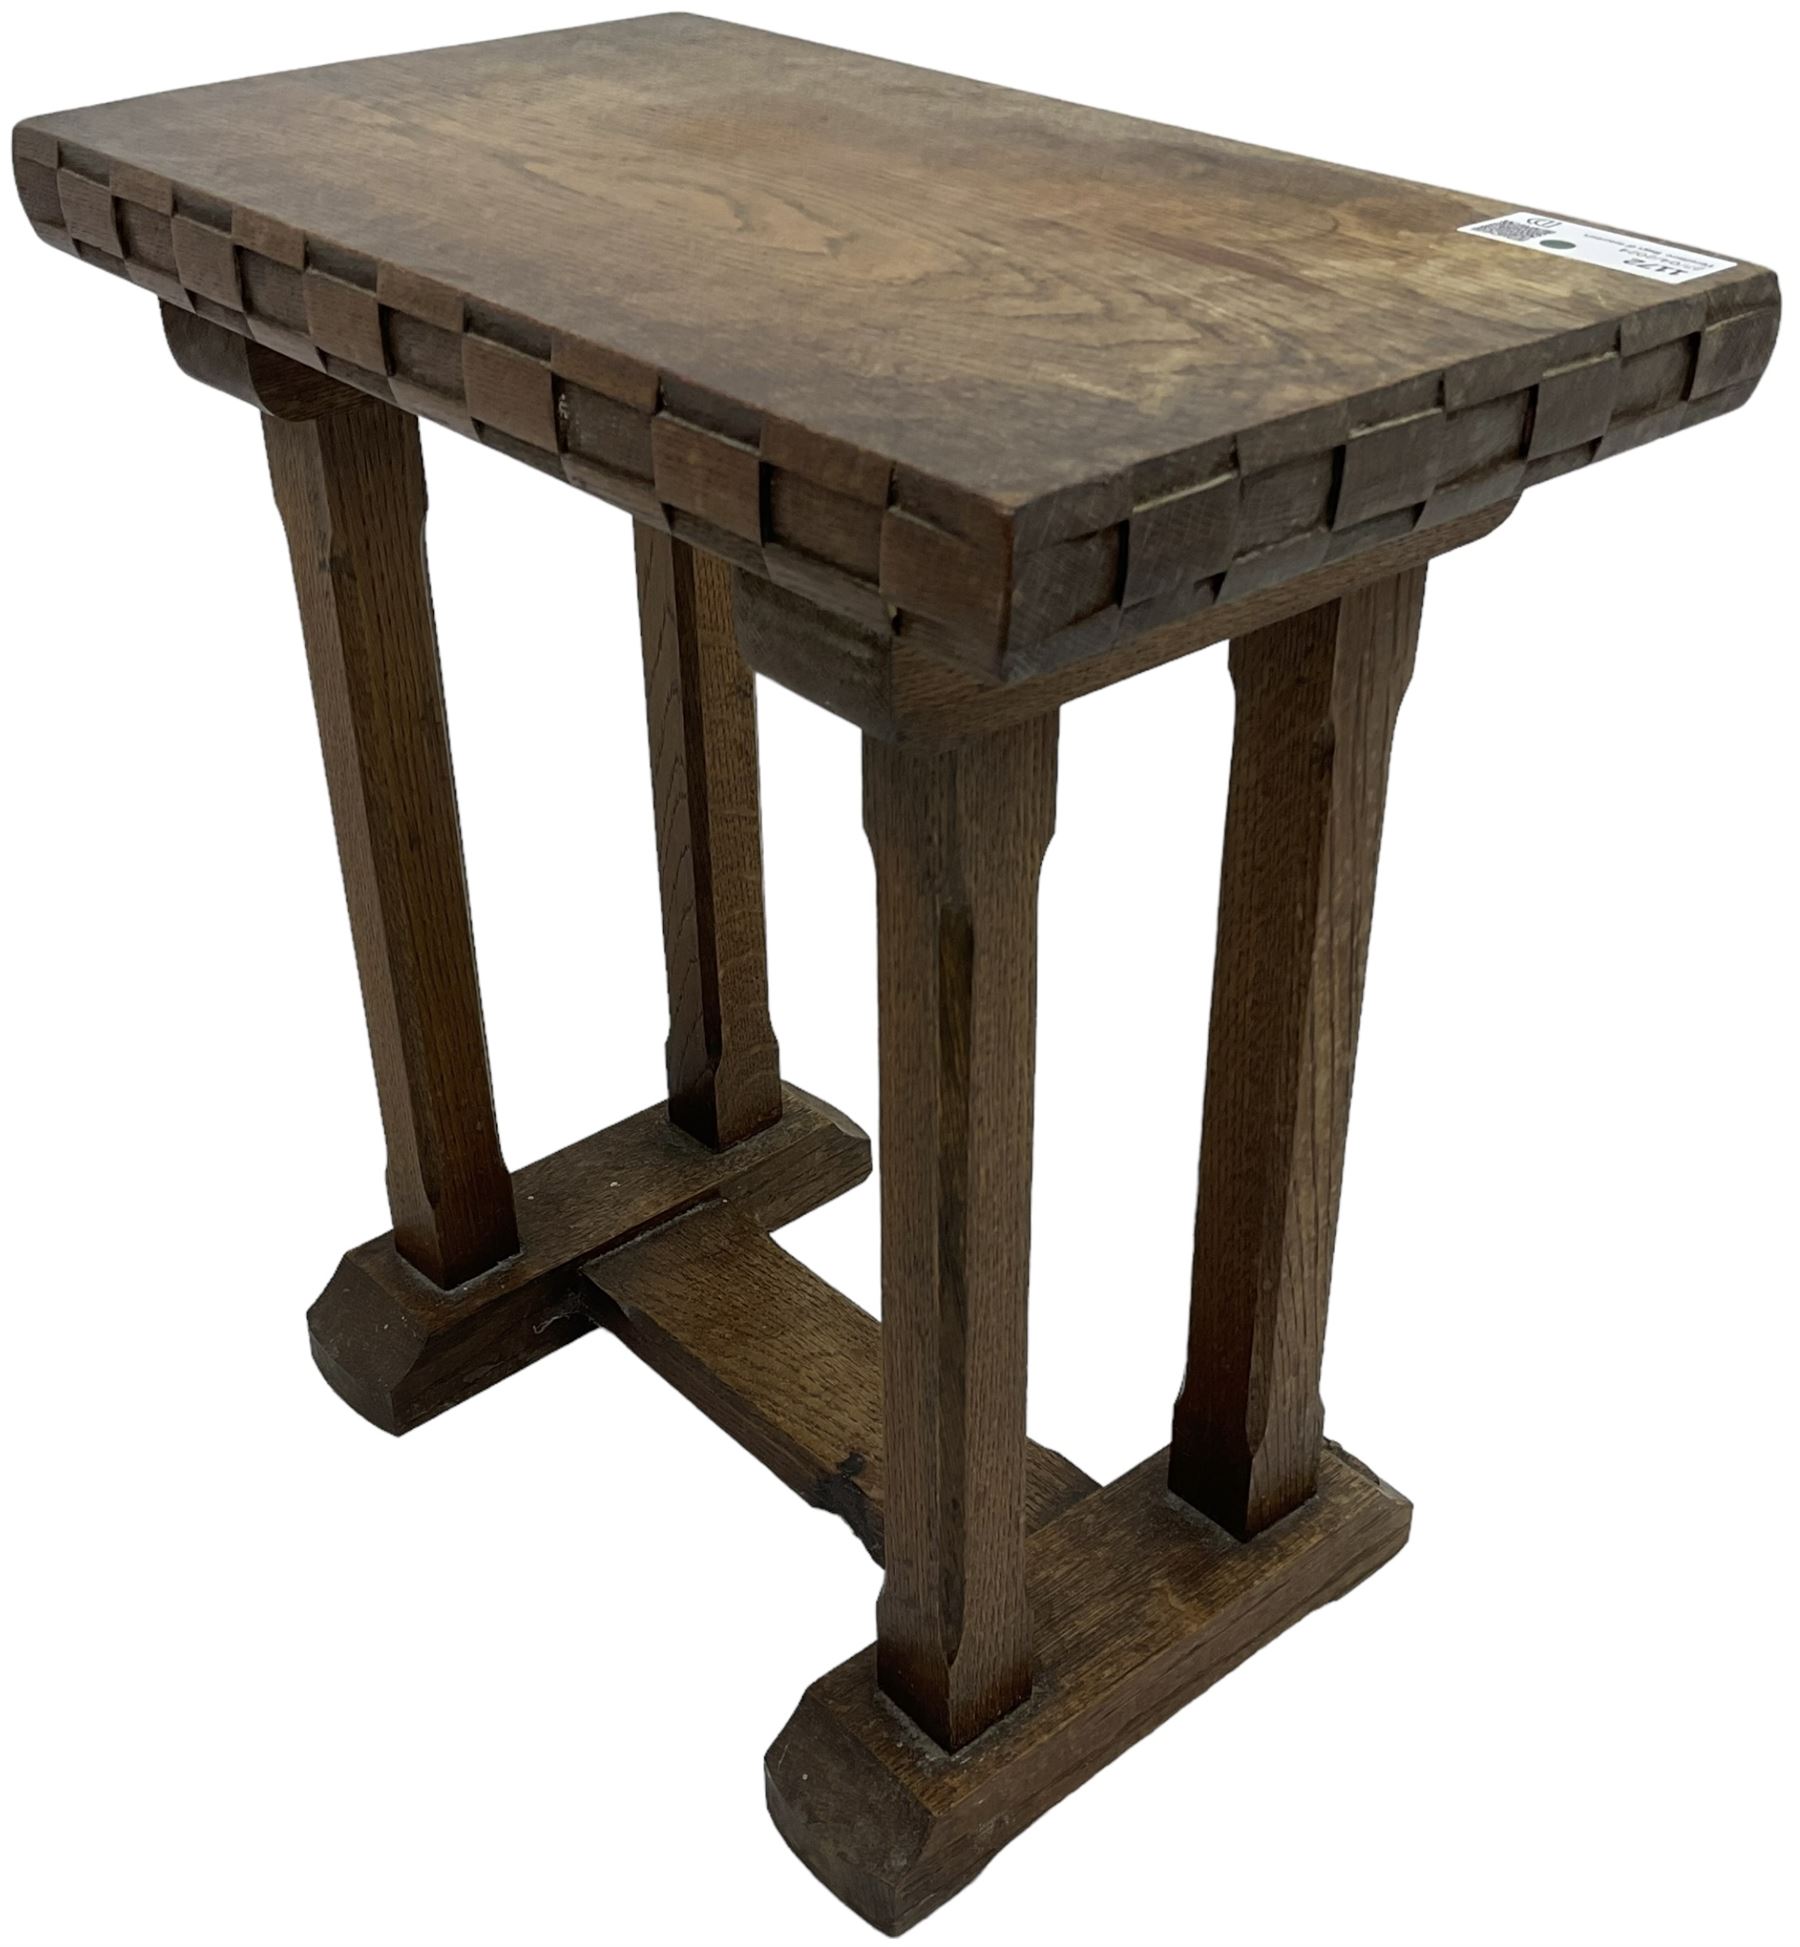 Yorkshire oak - small oak occasional table - Image 4 of 7